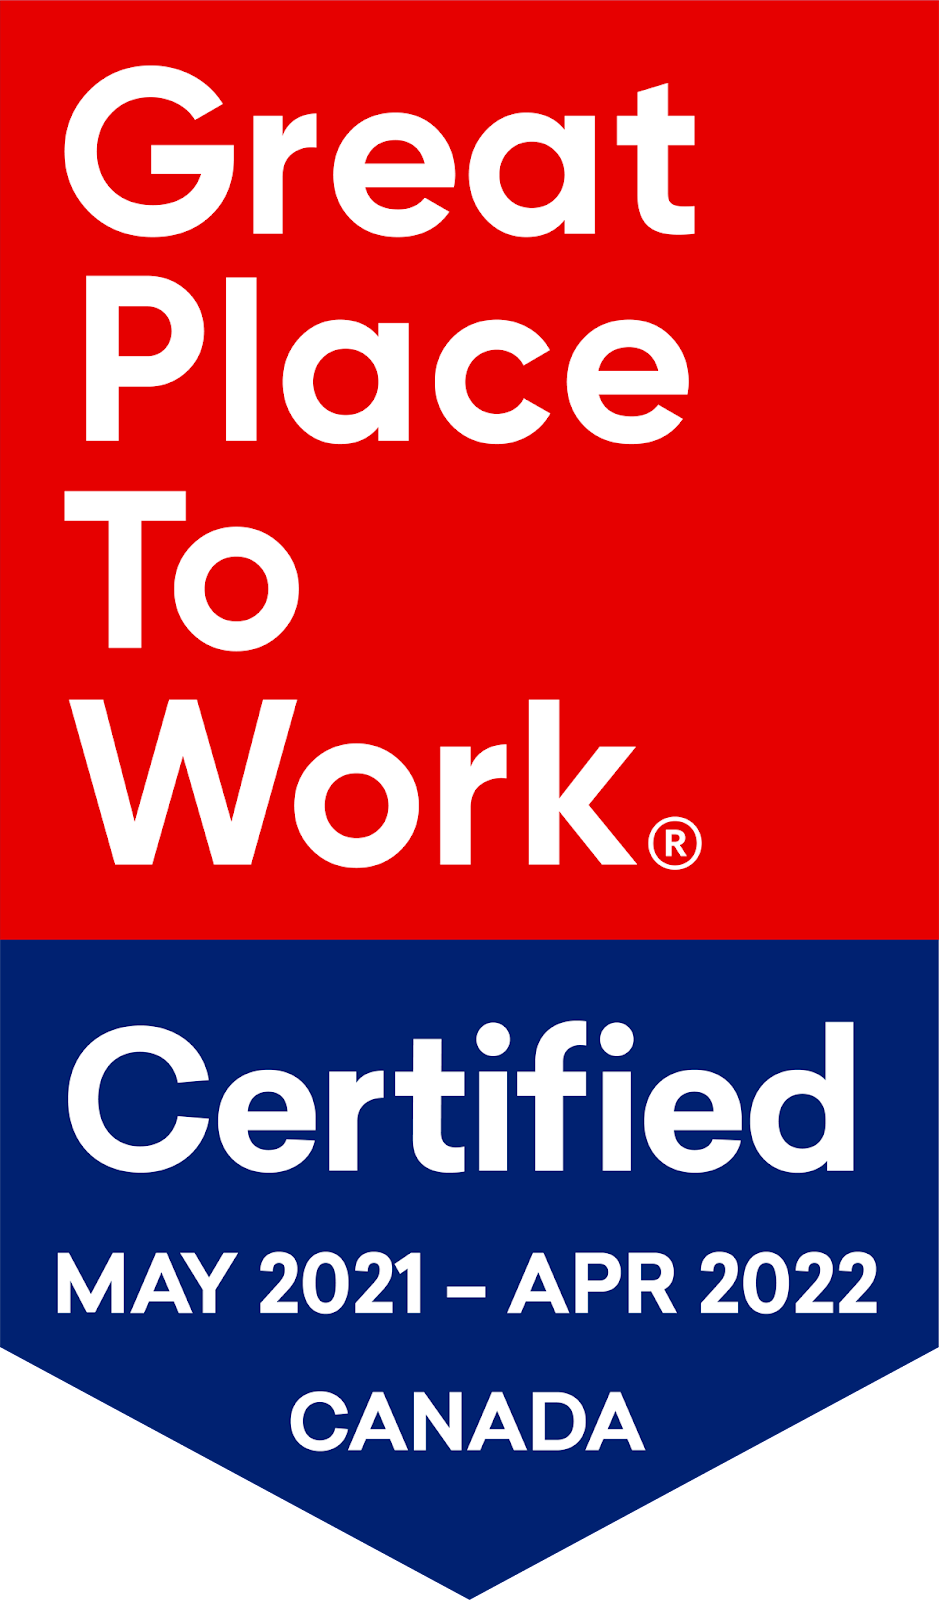 Great place to work certified 21-22